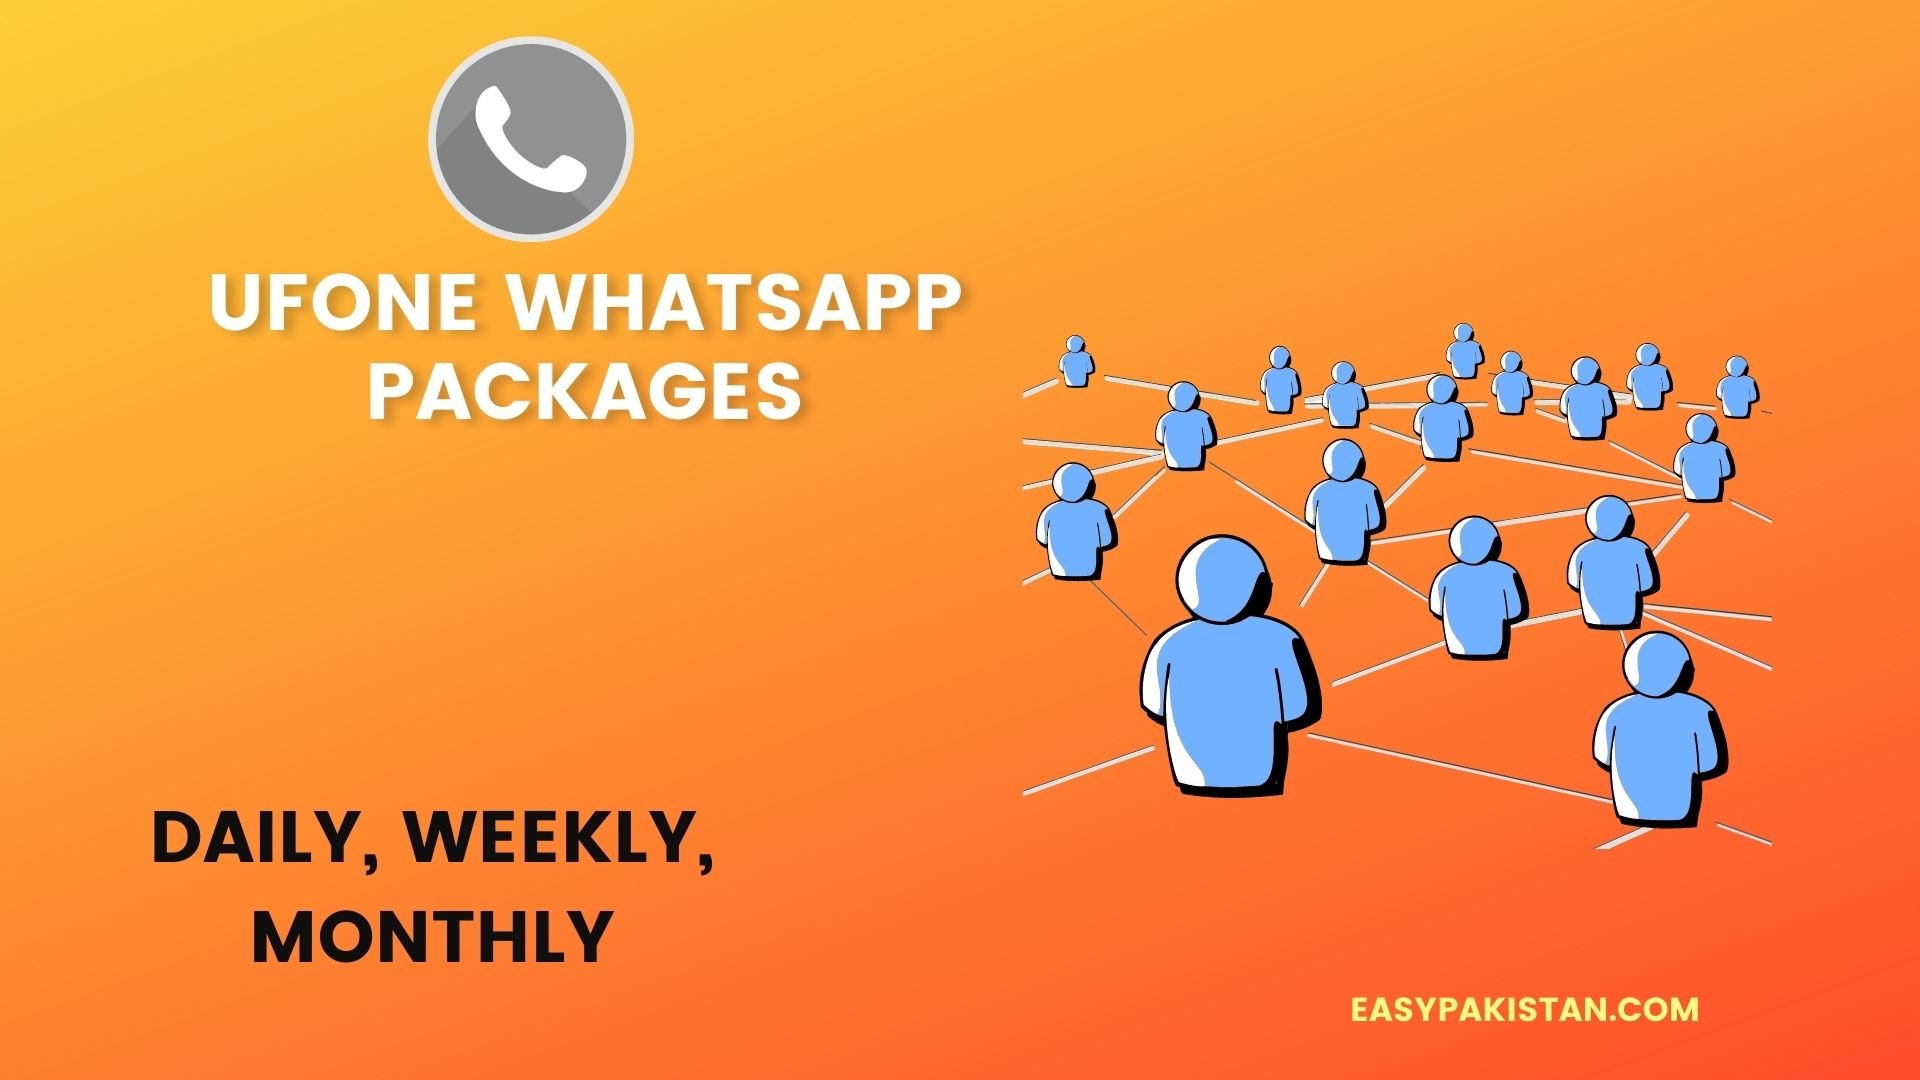 Ufone Whatsapp packages